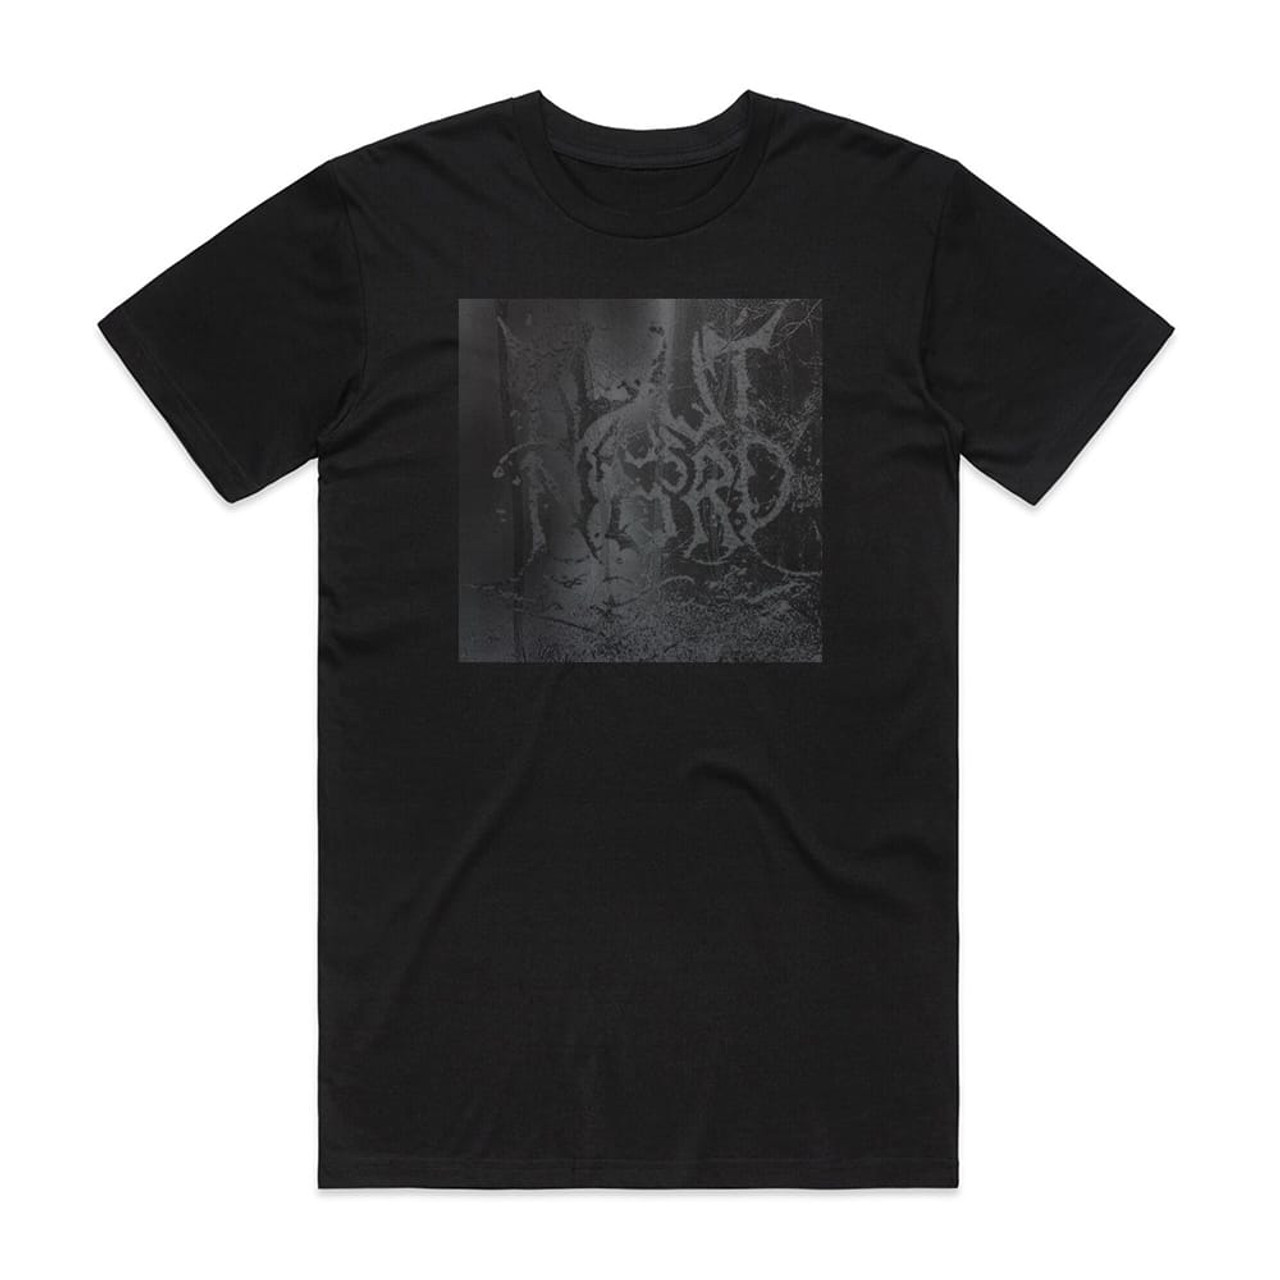 Blut aus Nord The Work Which Transforms God Album Cover T-Shirt Black